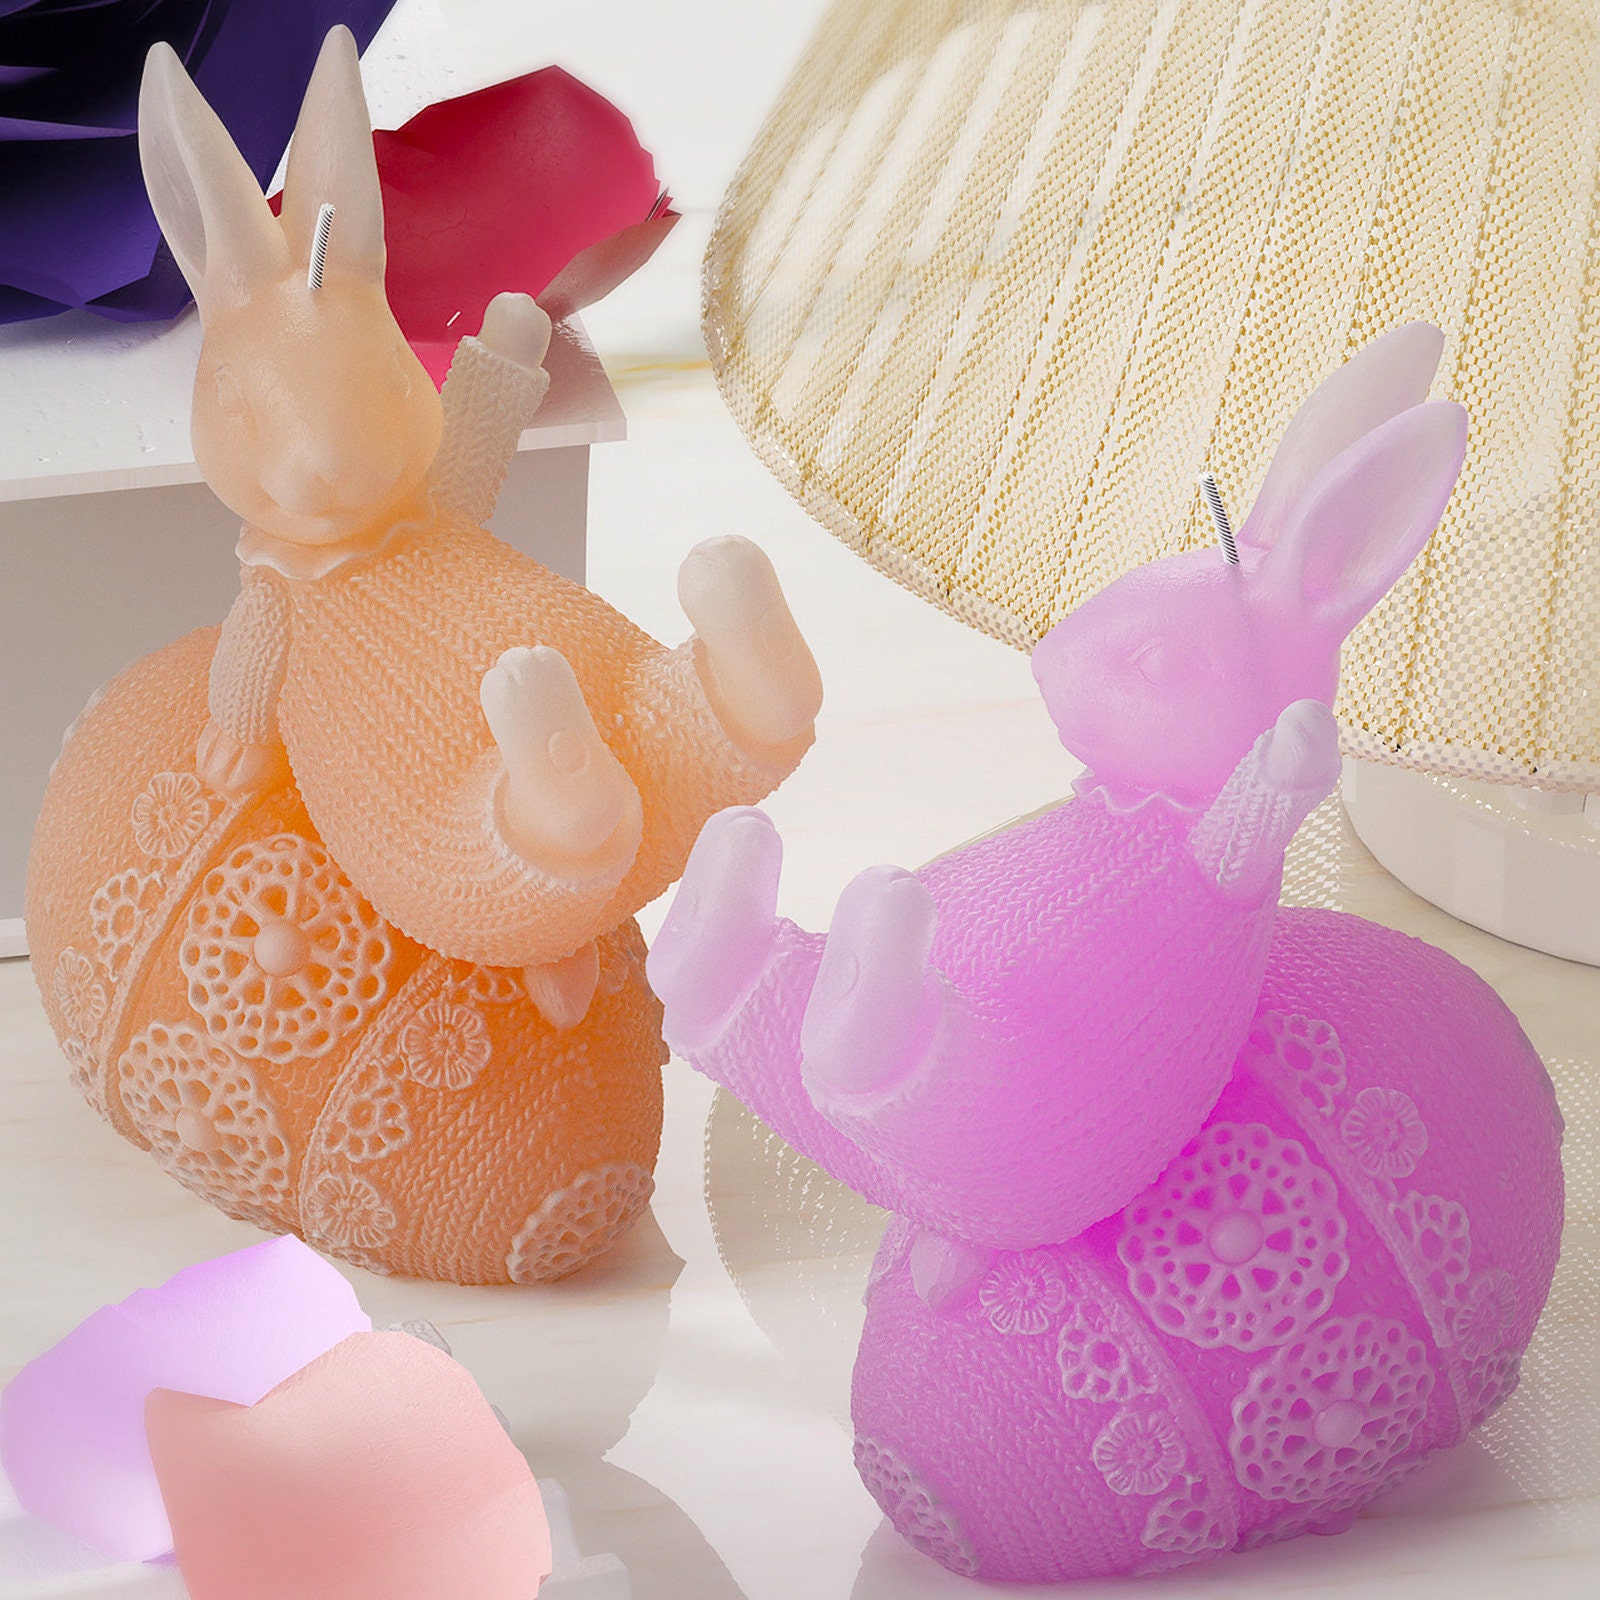 1Pc Easter Mold Rabbit Or Egg Mold 3D Easter Egg Silicone Mold